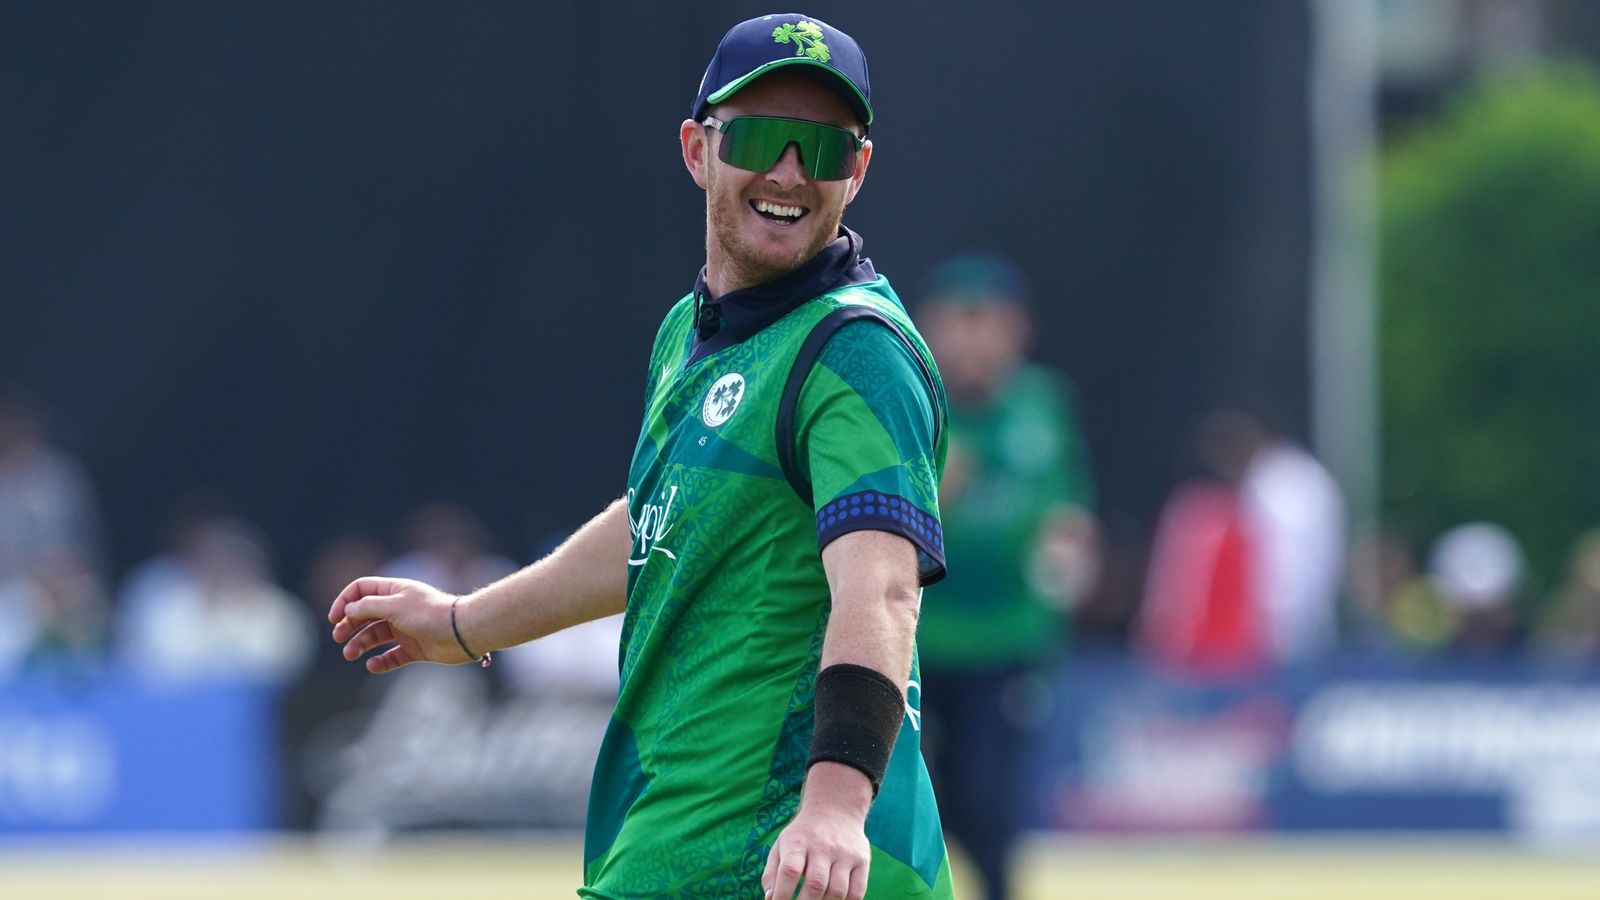 Ireland claim thrilling one-run win over Netherlands ahead of T20 World Cup